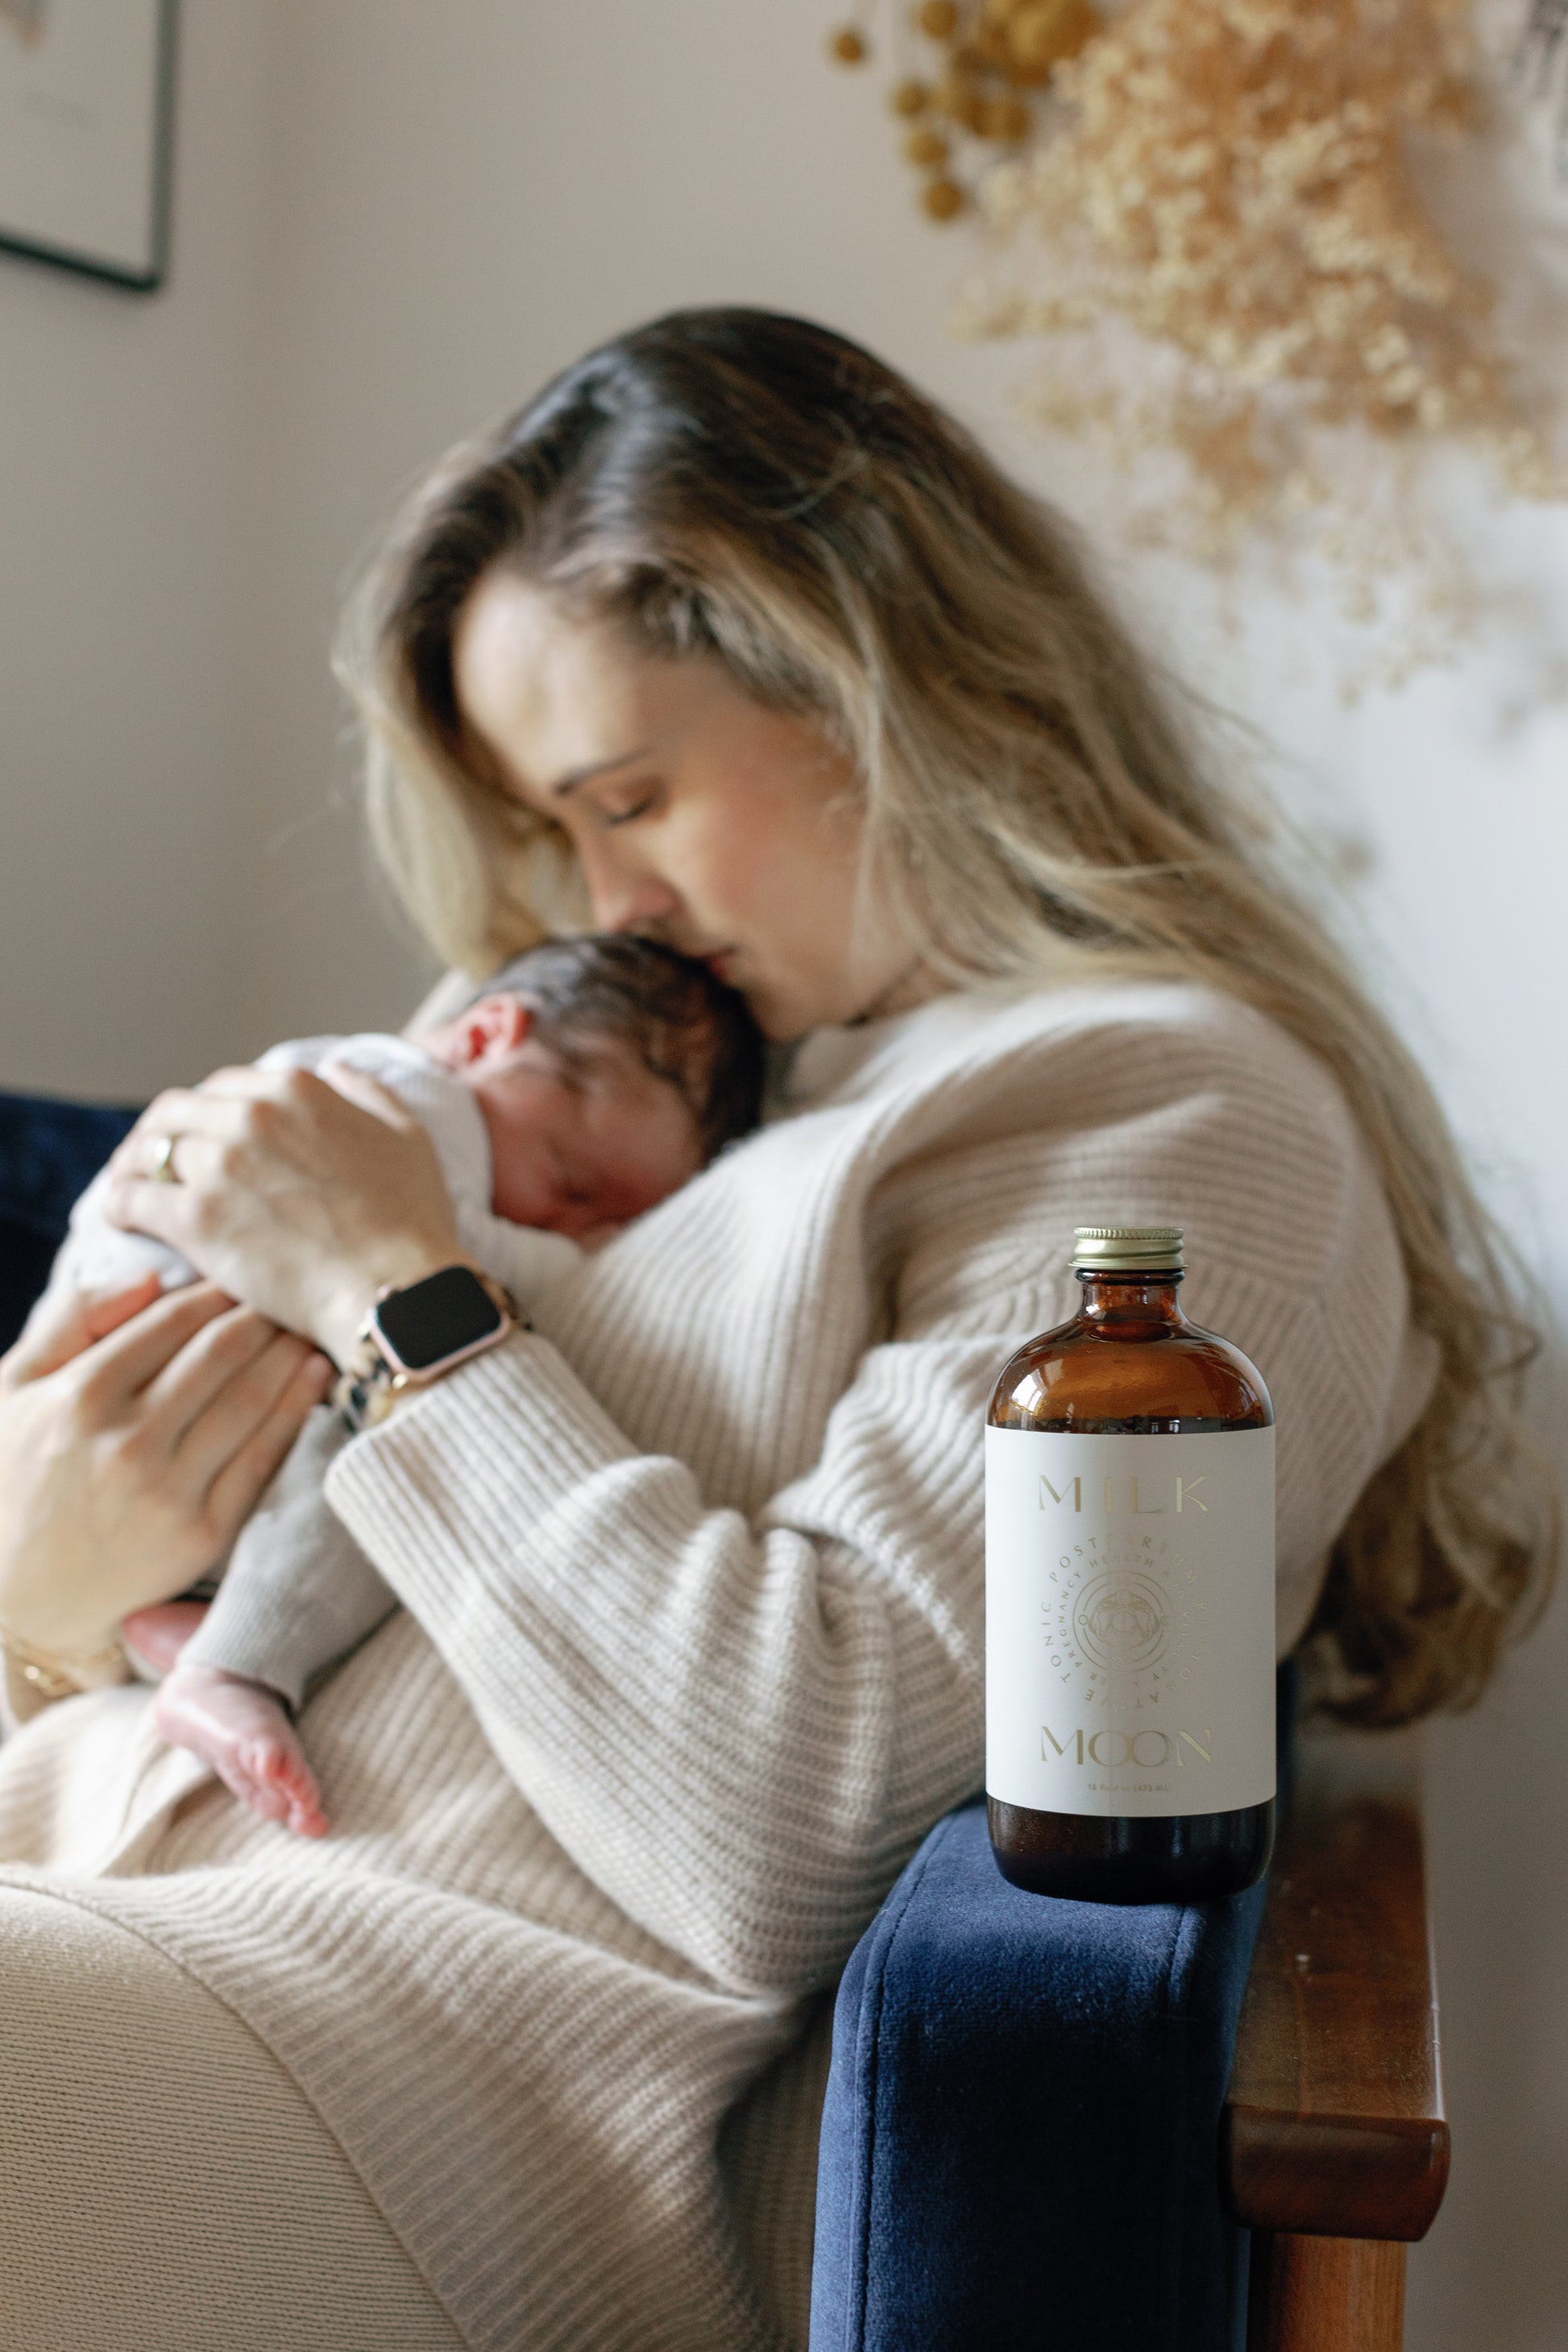 picture of a mother and her baby sitting on a chair with the postpartum restorative tonic with a bottle that has the phrase "Milk Moon" written on it